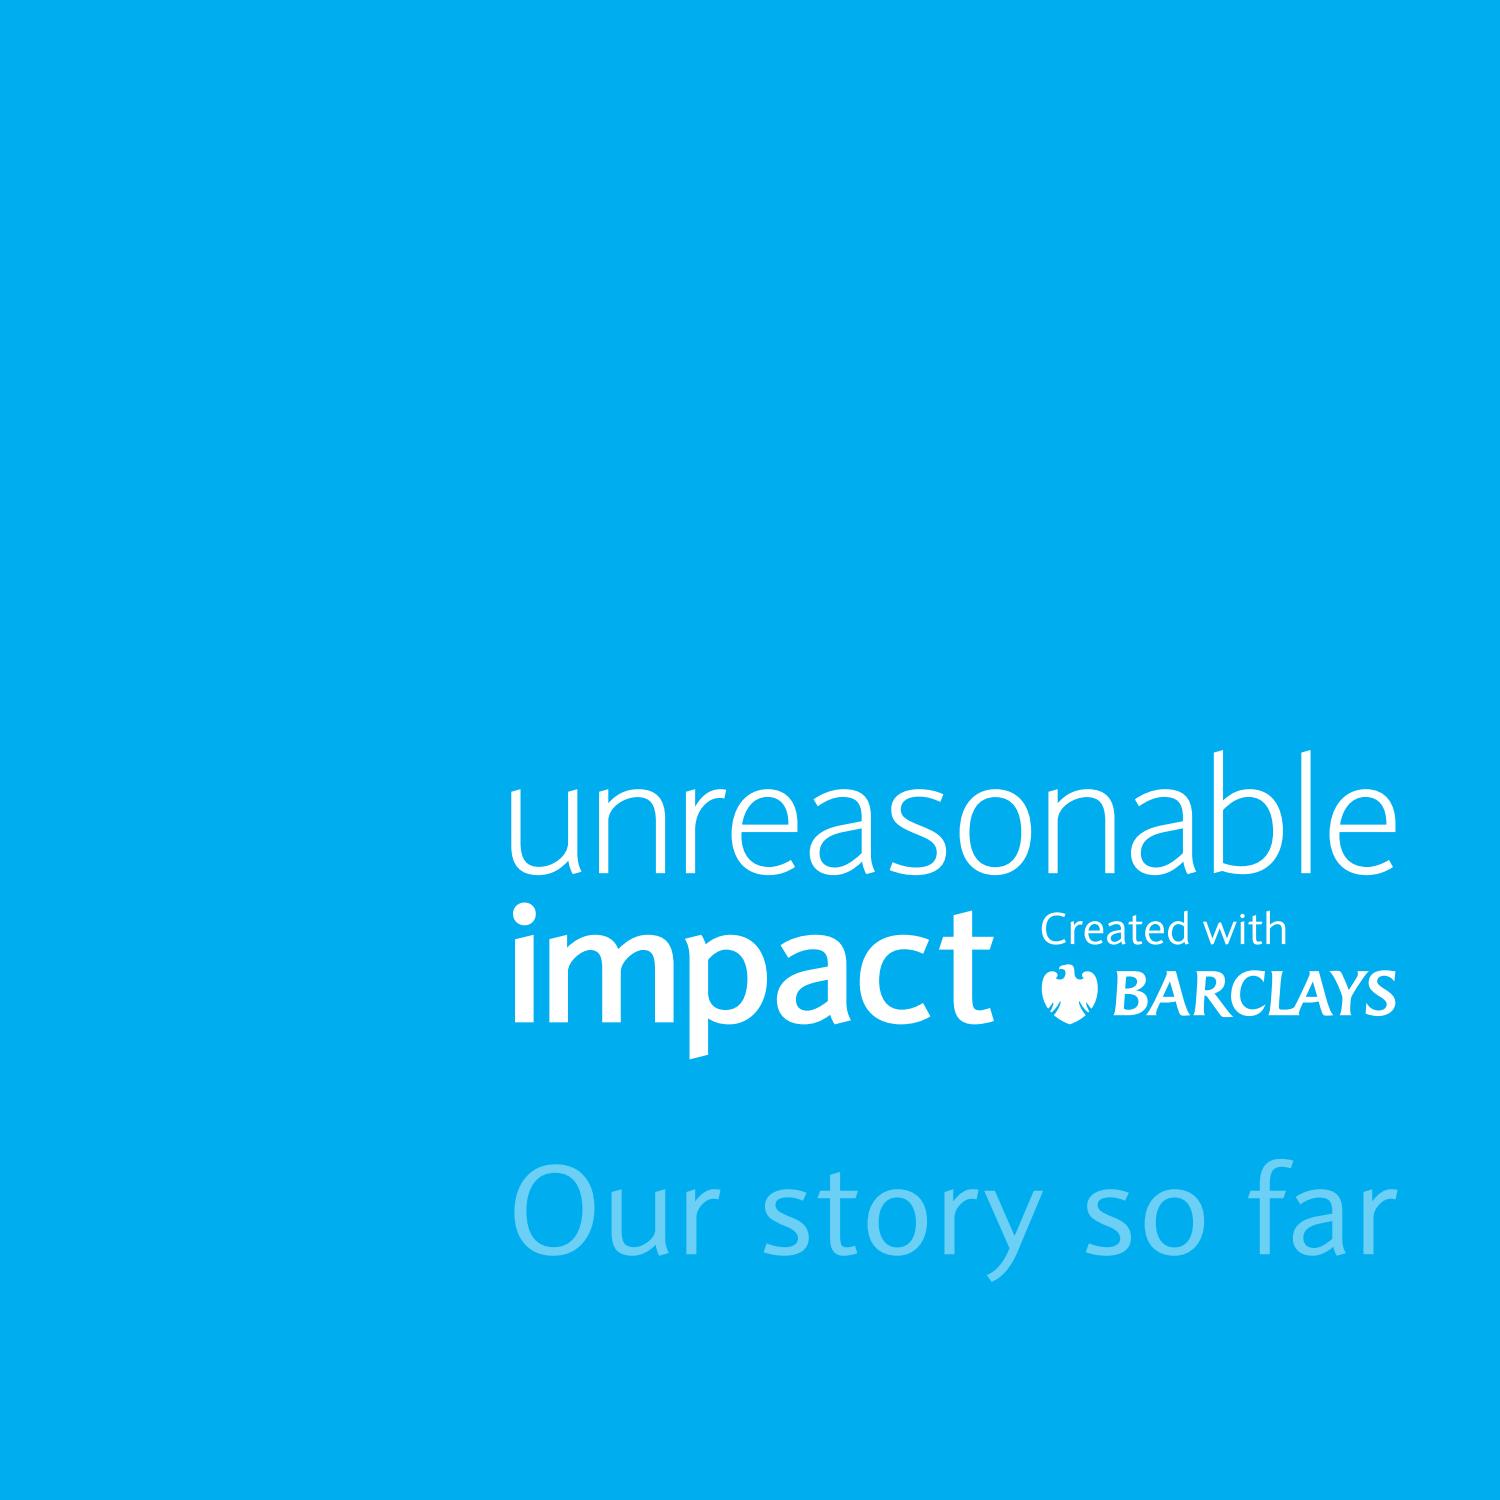 Unreasonable Impact report: Our story so far - Logo - https://s39939.pcdn.co/wp-content/uploads/2020/07/Report_Barclays.jpg